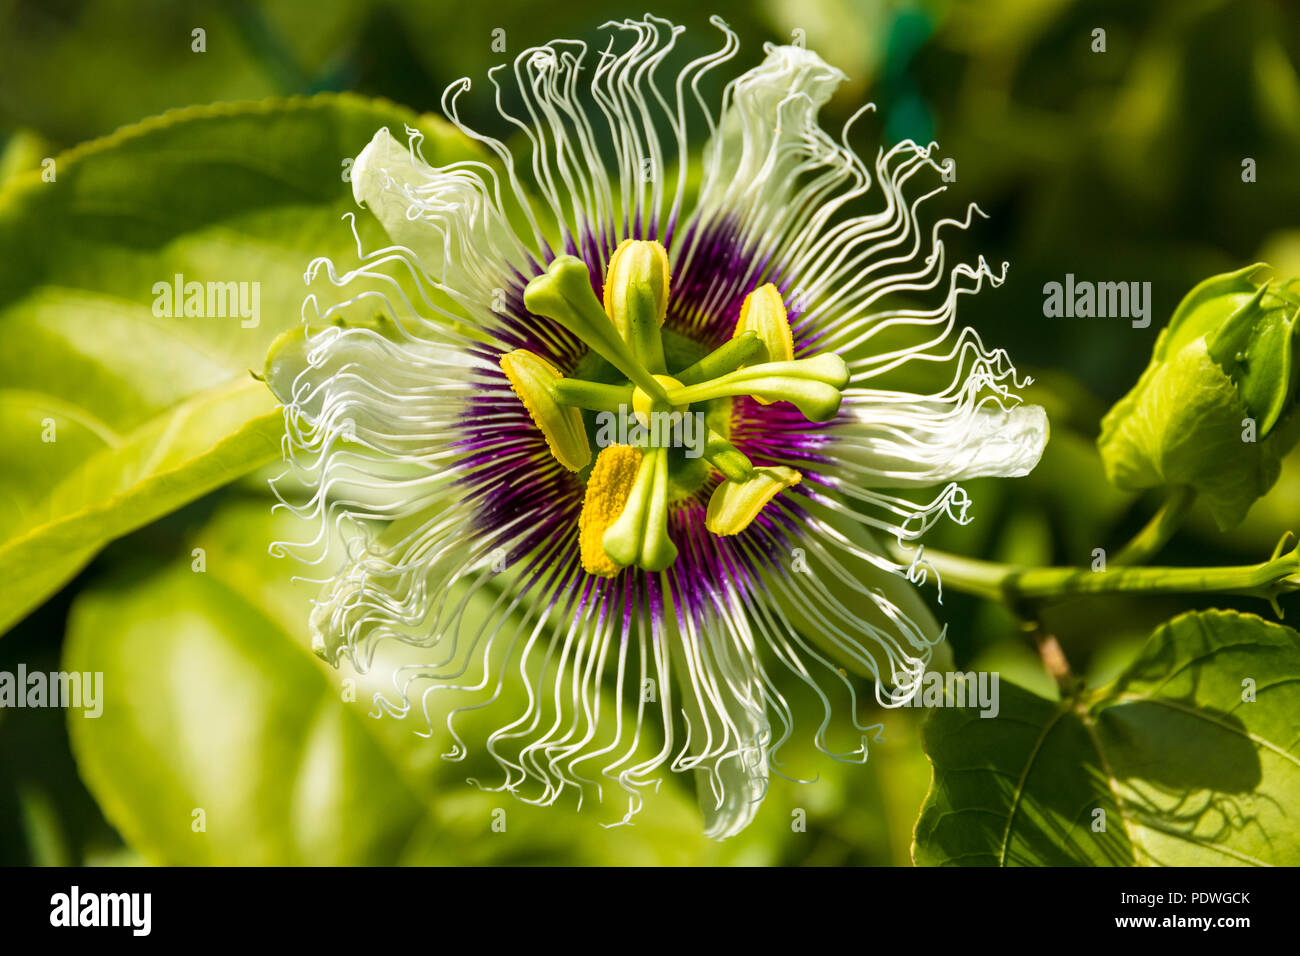 Overhead shot of a beautiful passion flower (Passiflora edulis) cultivated in a garden in Malaysia. The base of the flower is a rich purple with... Stock Photo